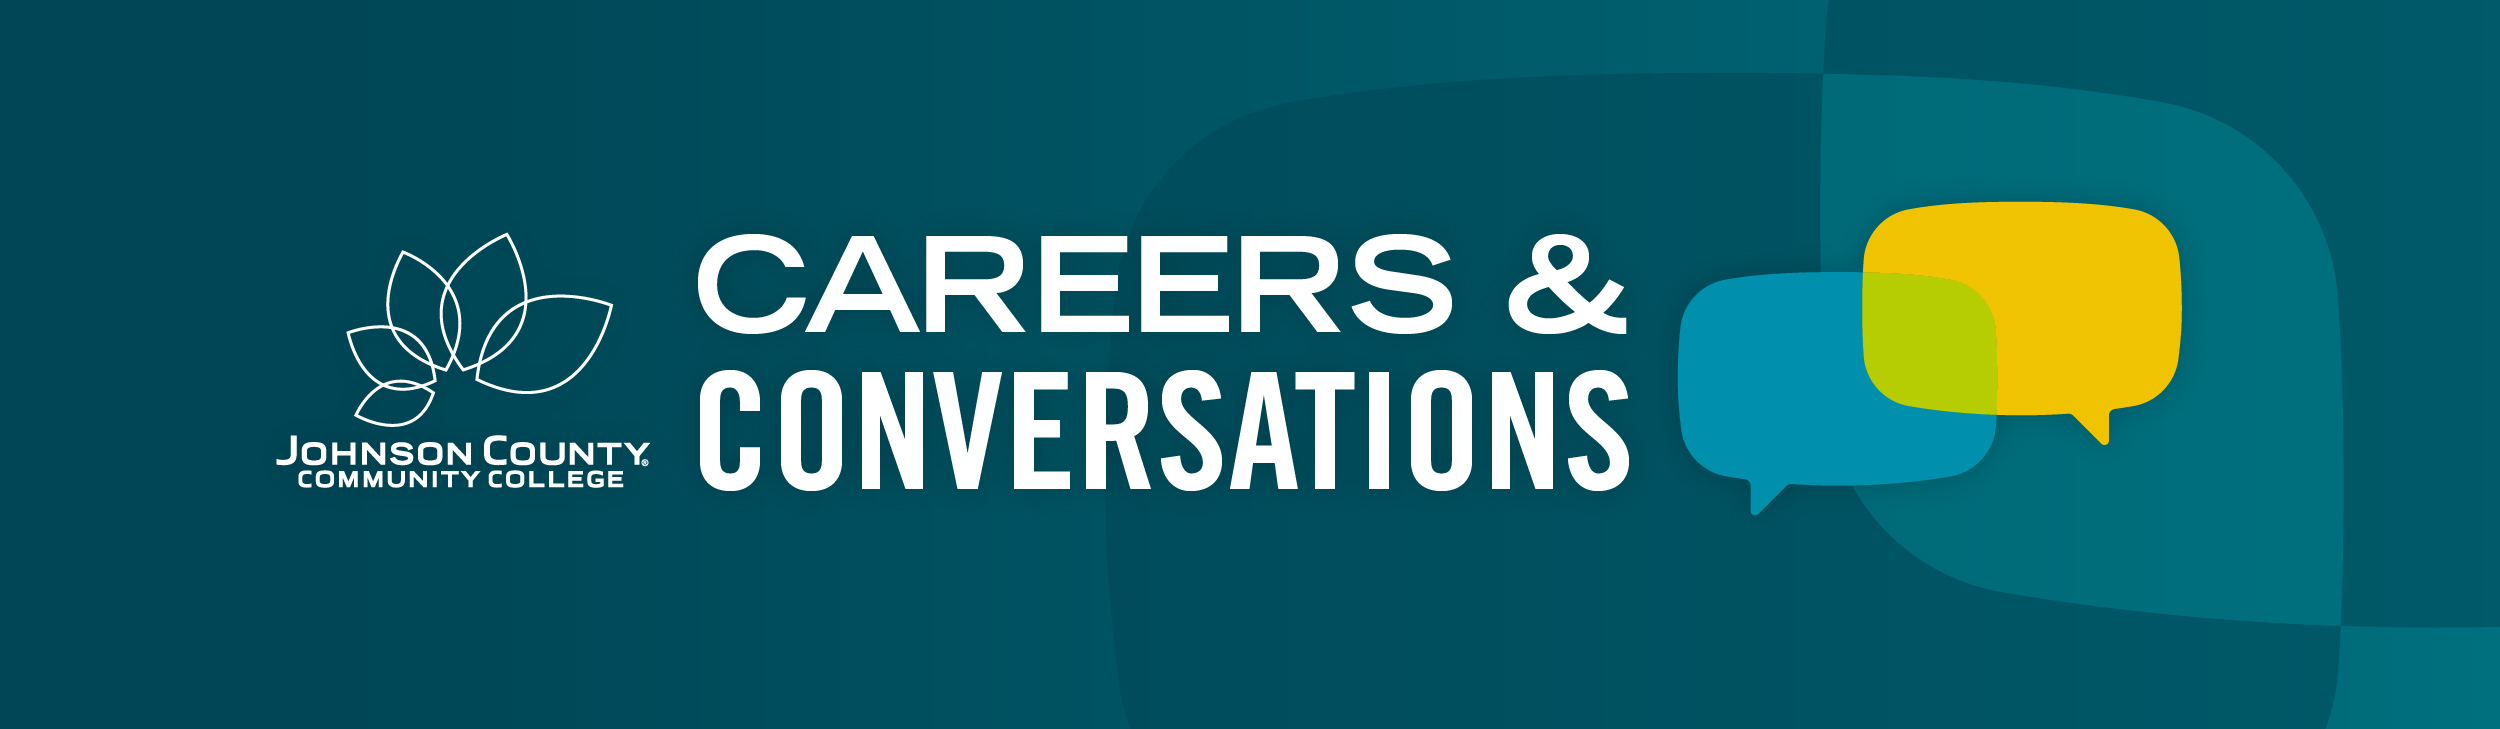 Jonhson County Community College Careers & Conversations Campaign Graphic 